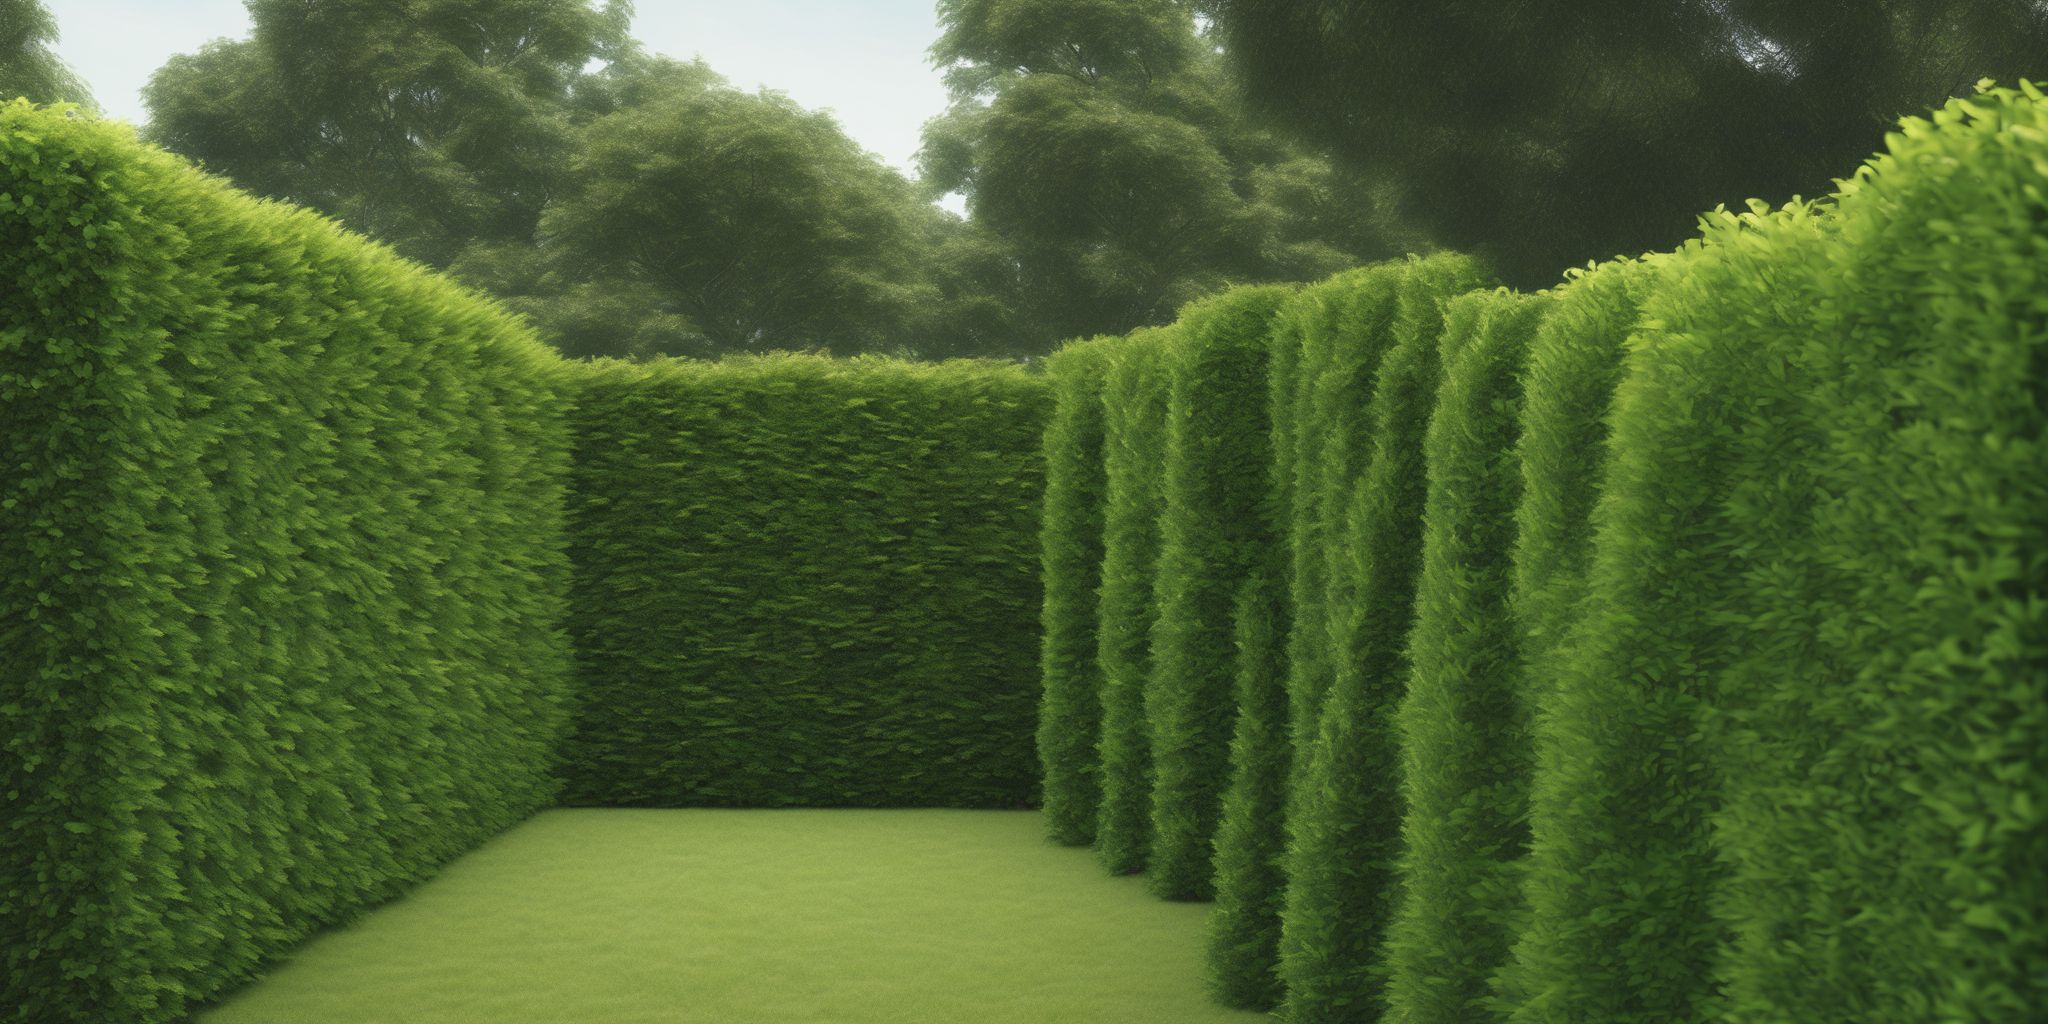 Hedge  in realistic, photographic style